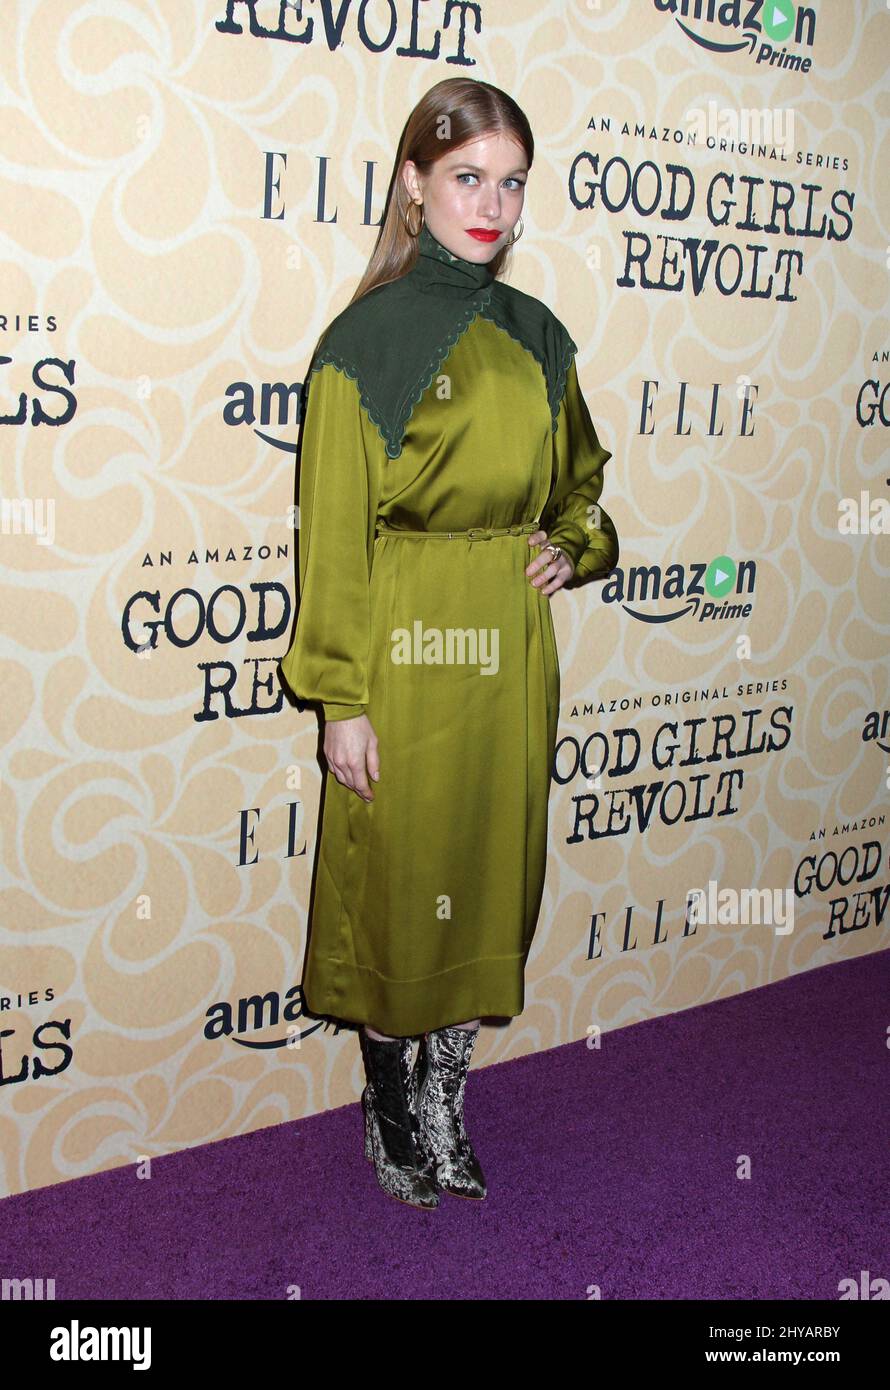 Genevieve Angelson Amazon Red Carpet Premiere Screening of Original Drama Series 'Good Girls Revolt' Held at Hearst Tower on October 18, 2016. Stock Photo